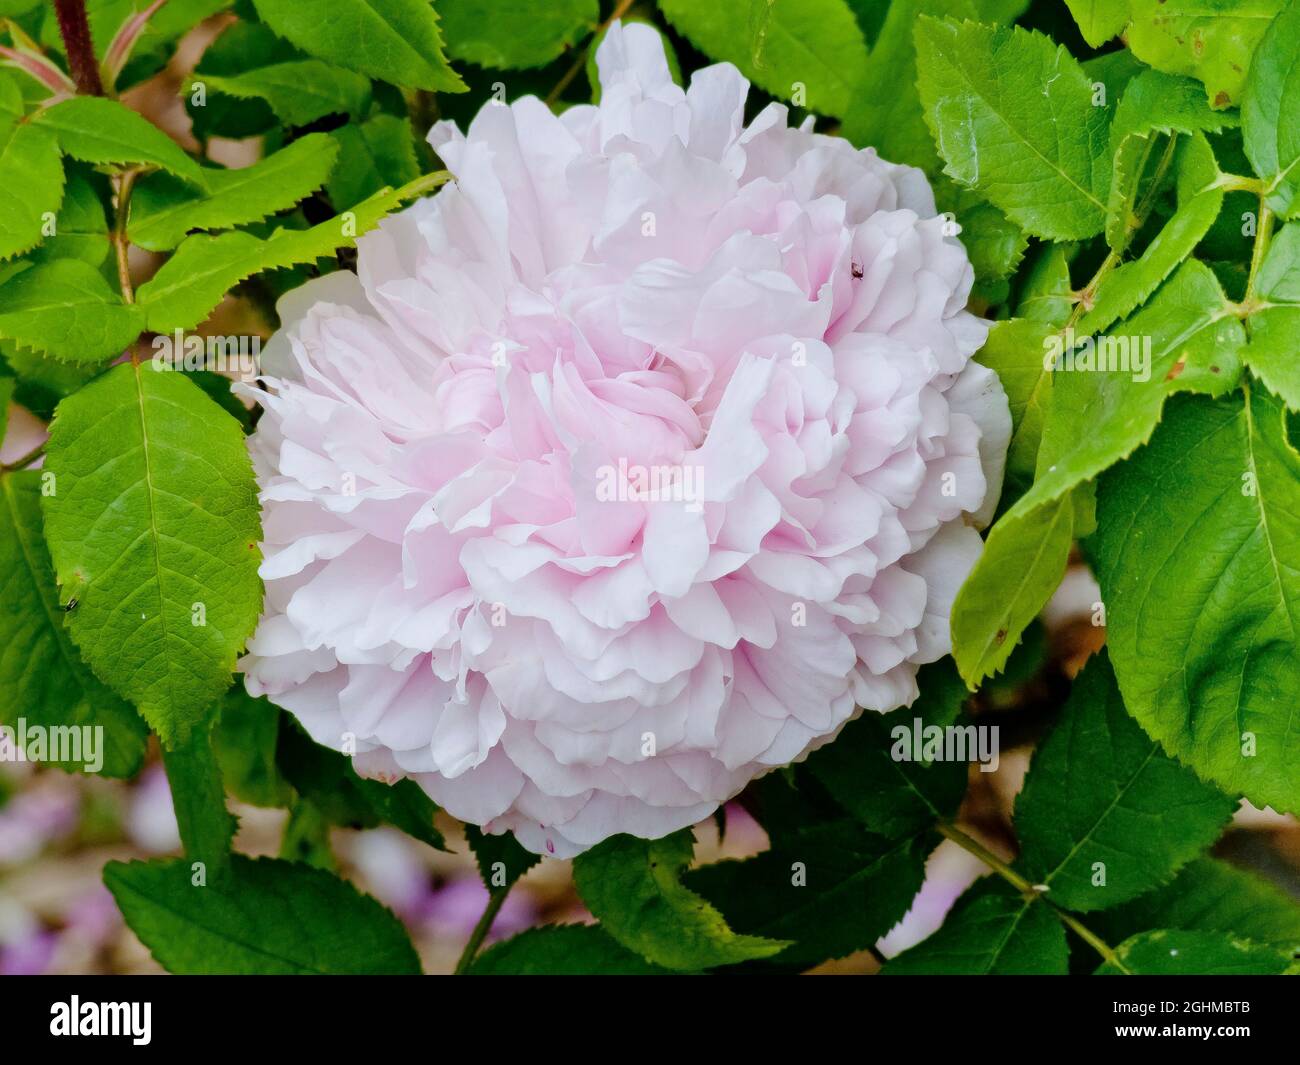 Page 7 - Flowering Rose Rosa Sp High Resolution Stock Photography and  Images - Alamy